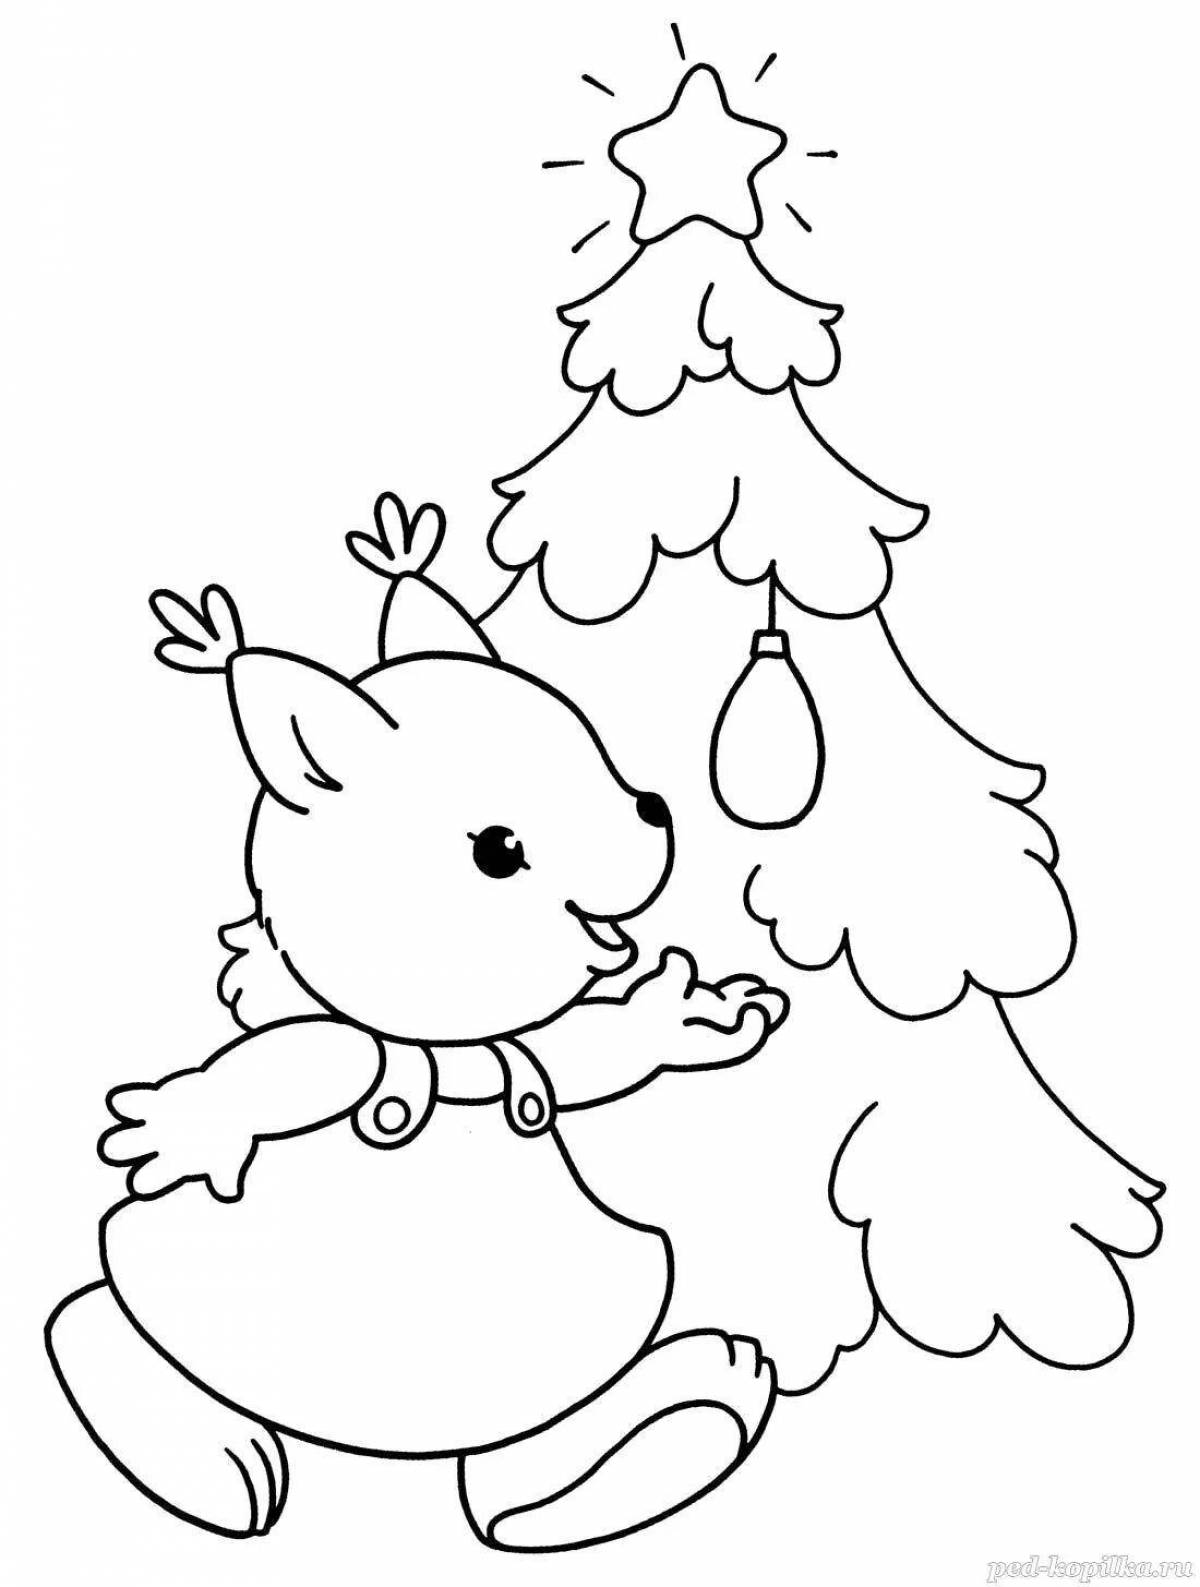 Coloring book bright hare and tree